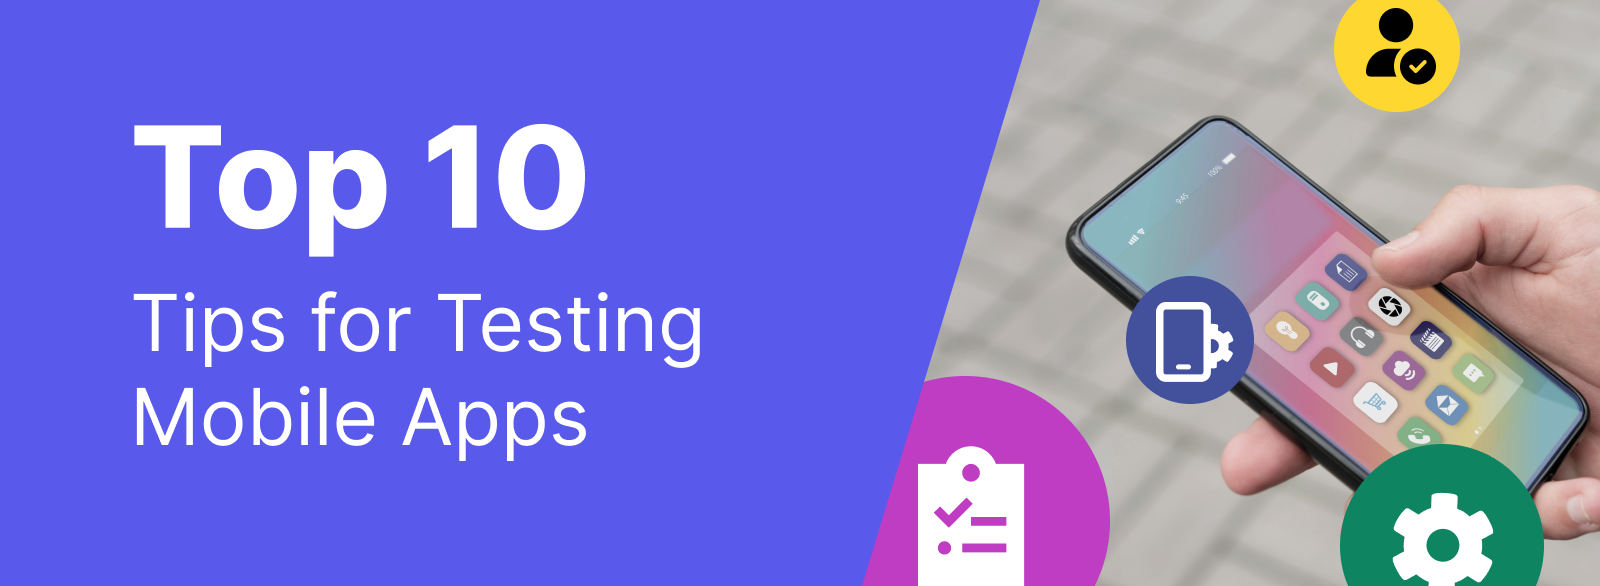 Top 10 tips for testing mobile apps